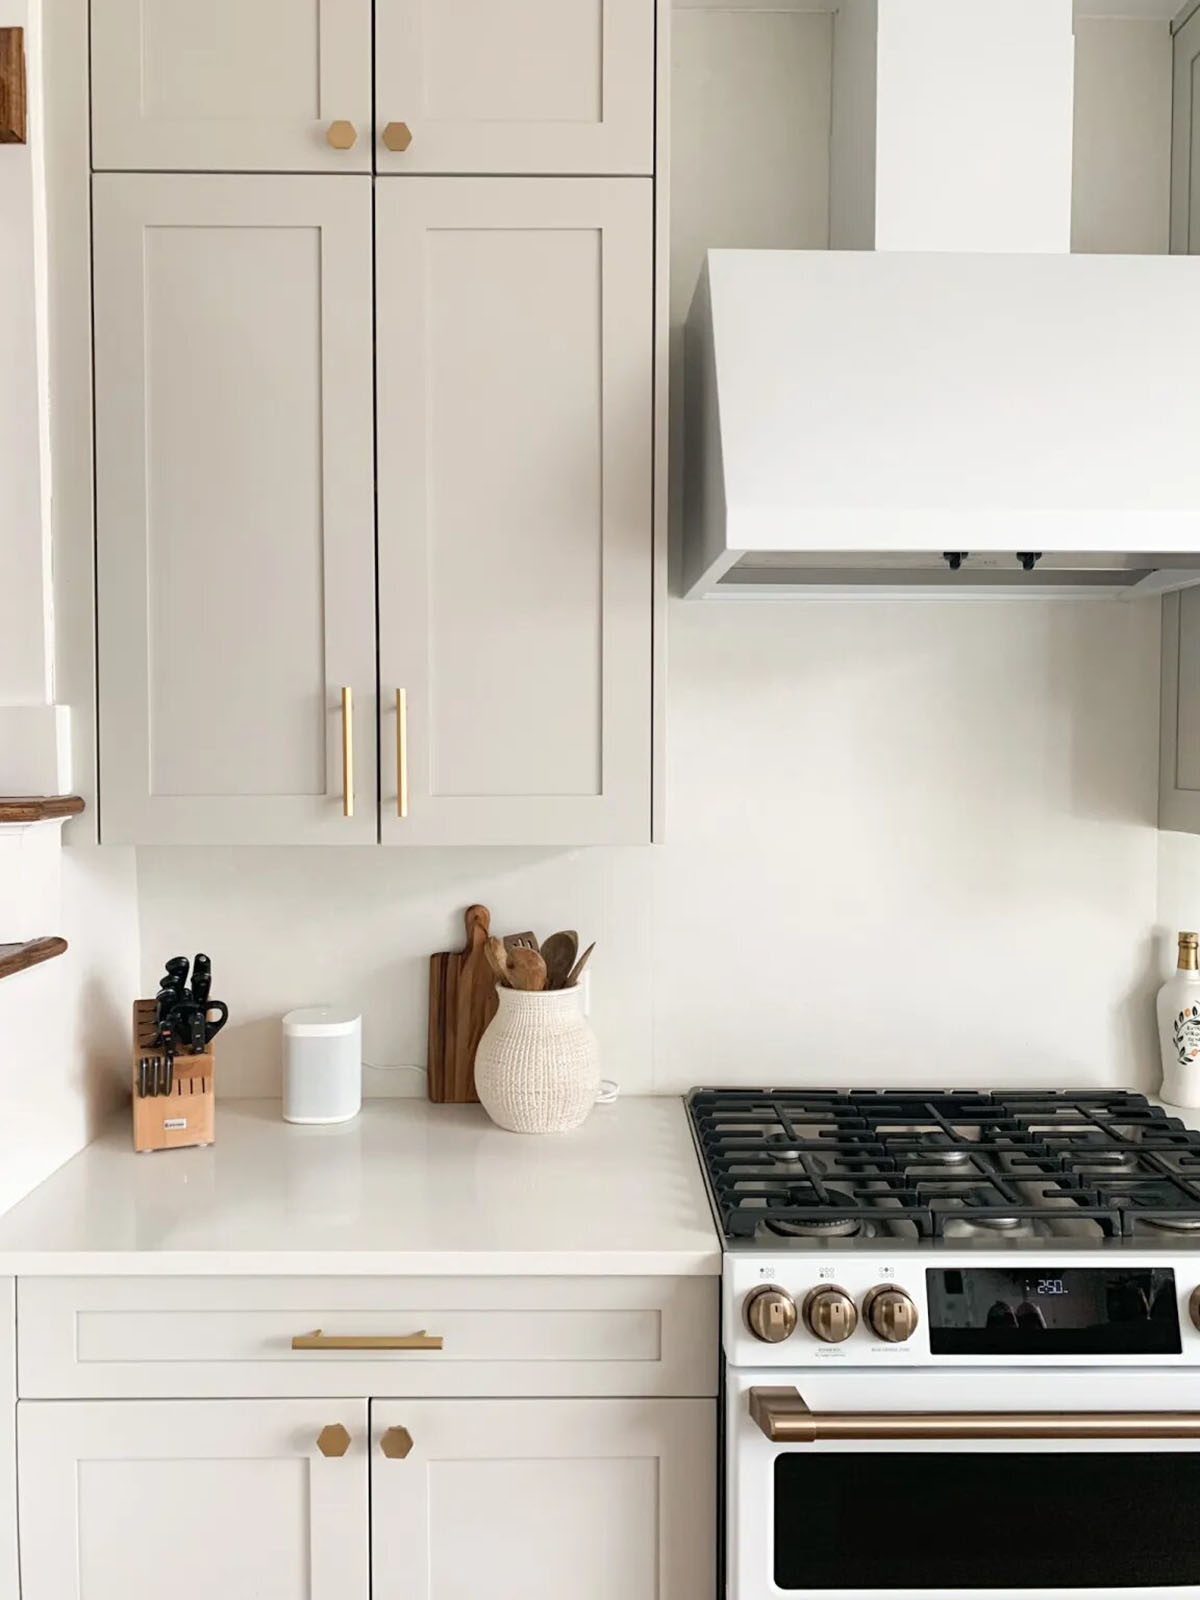 Sherwin Williams Agreeable Grey cabinets with a creamy white wall color and gold hardware.